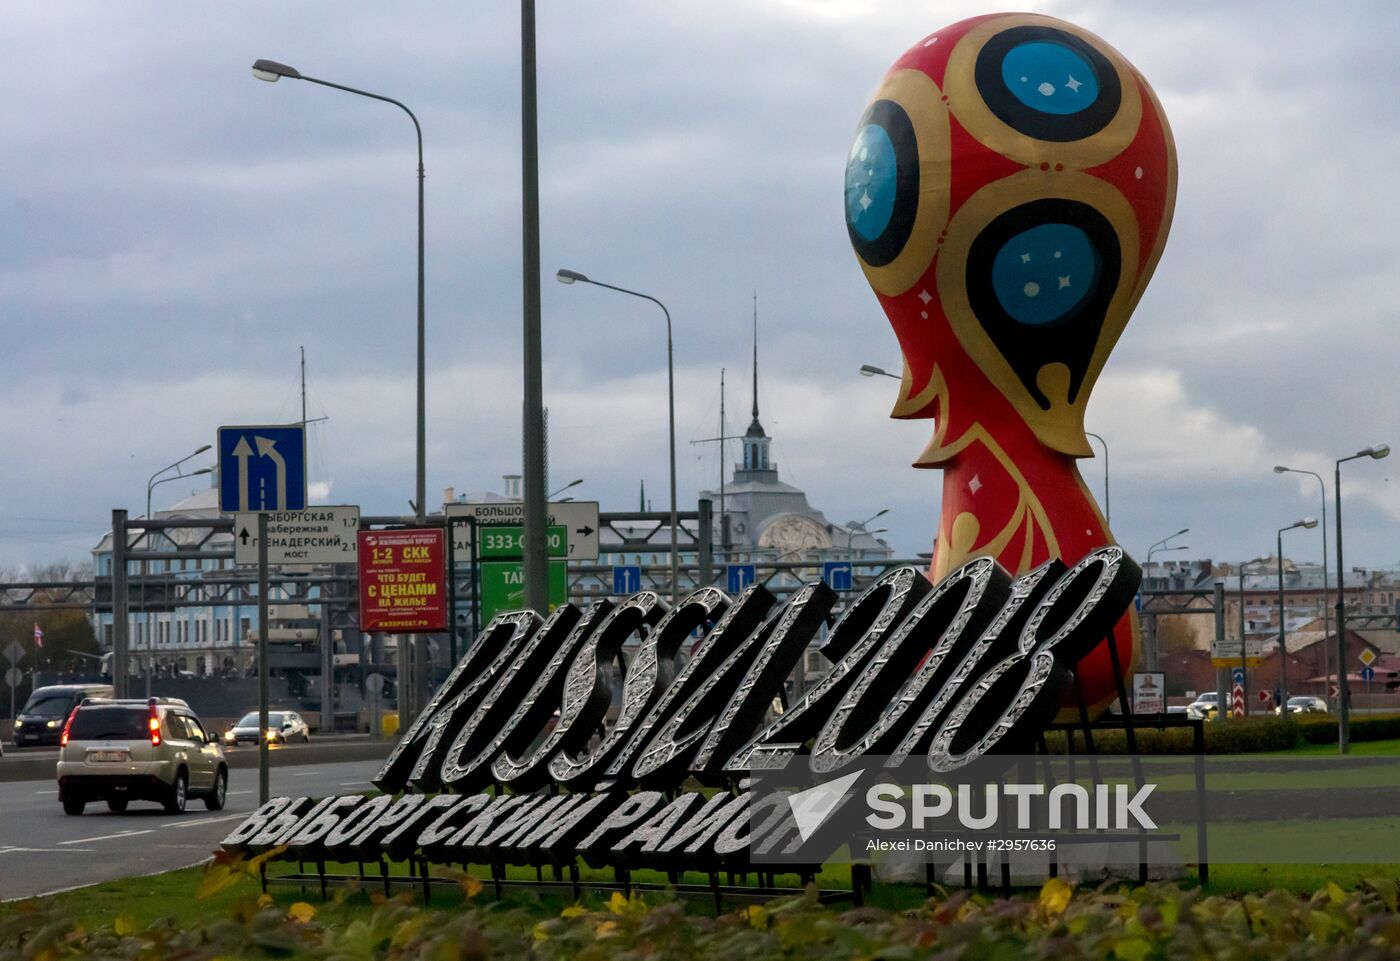 2018 FIFA World Cup emblem installed in St Petersburg